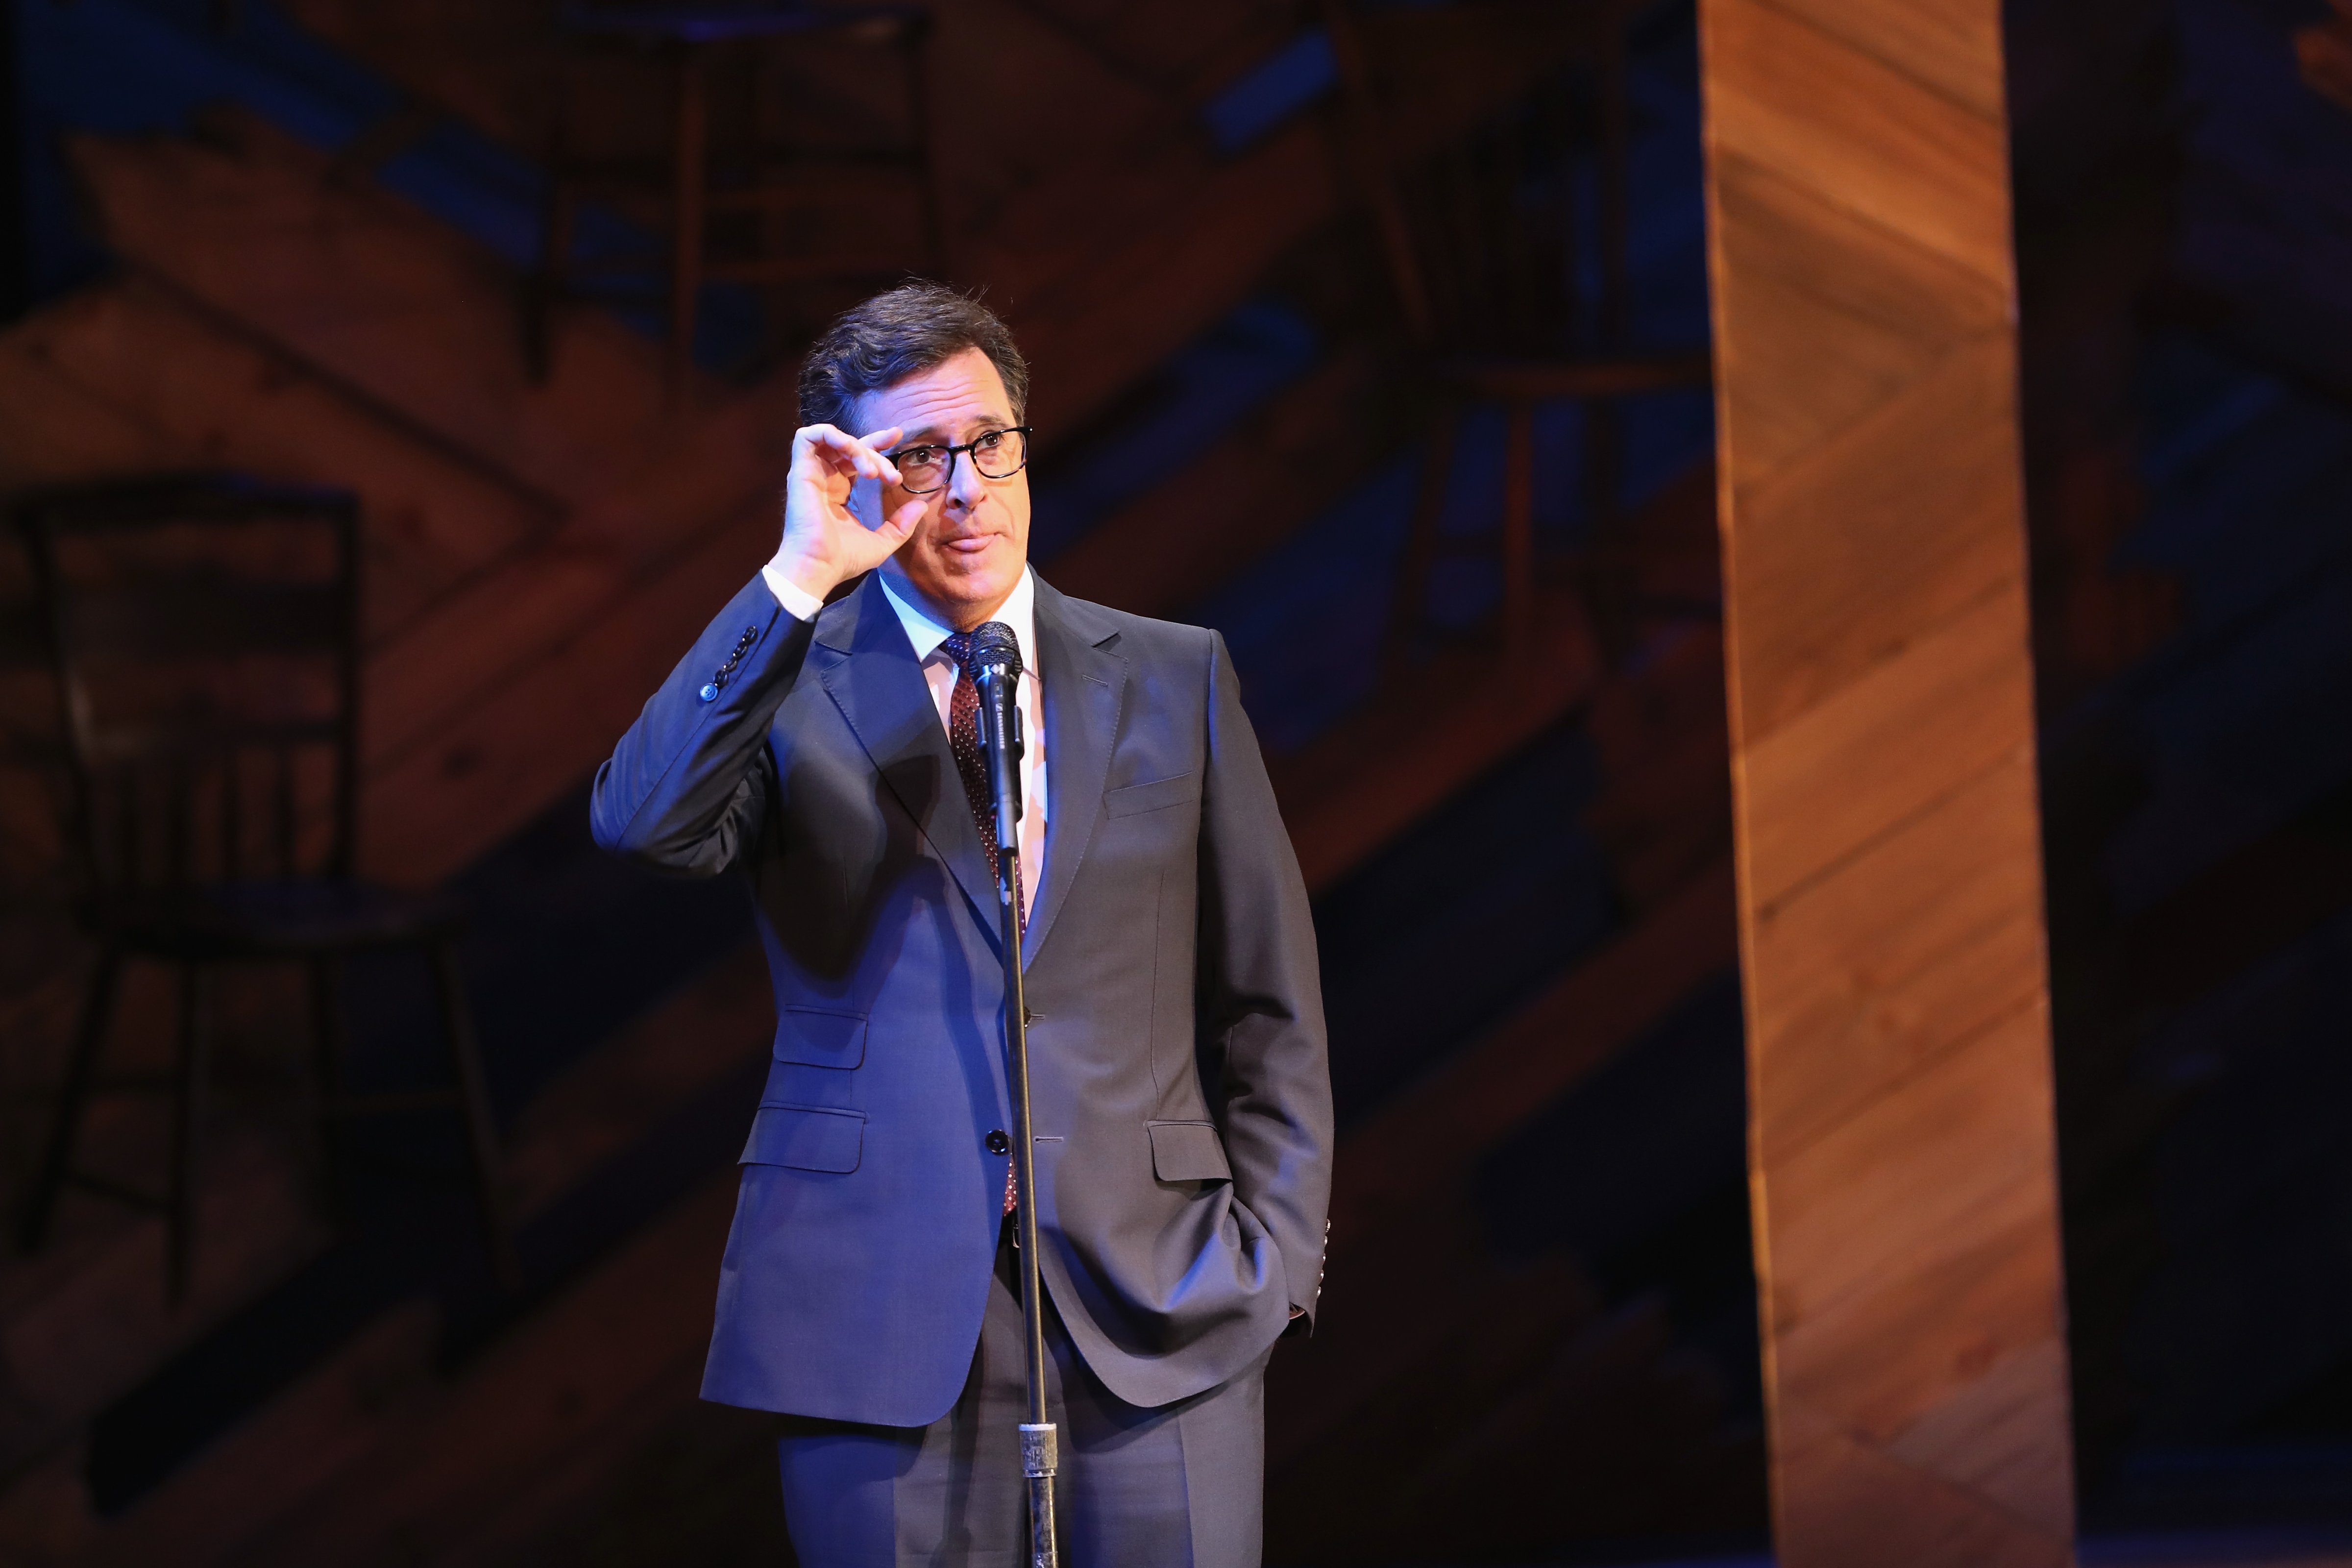 Late Show host Stephen Colbert speaks while serving as emcee at Broadway's Jacobs Theater on September 19, 2016 in New York City. (John Moore—Getty Images)